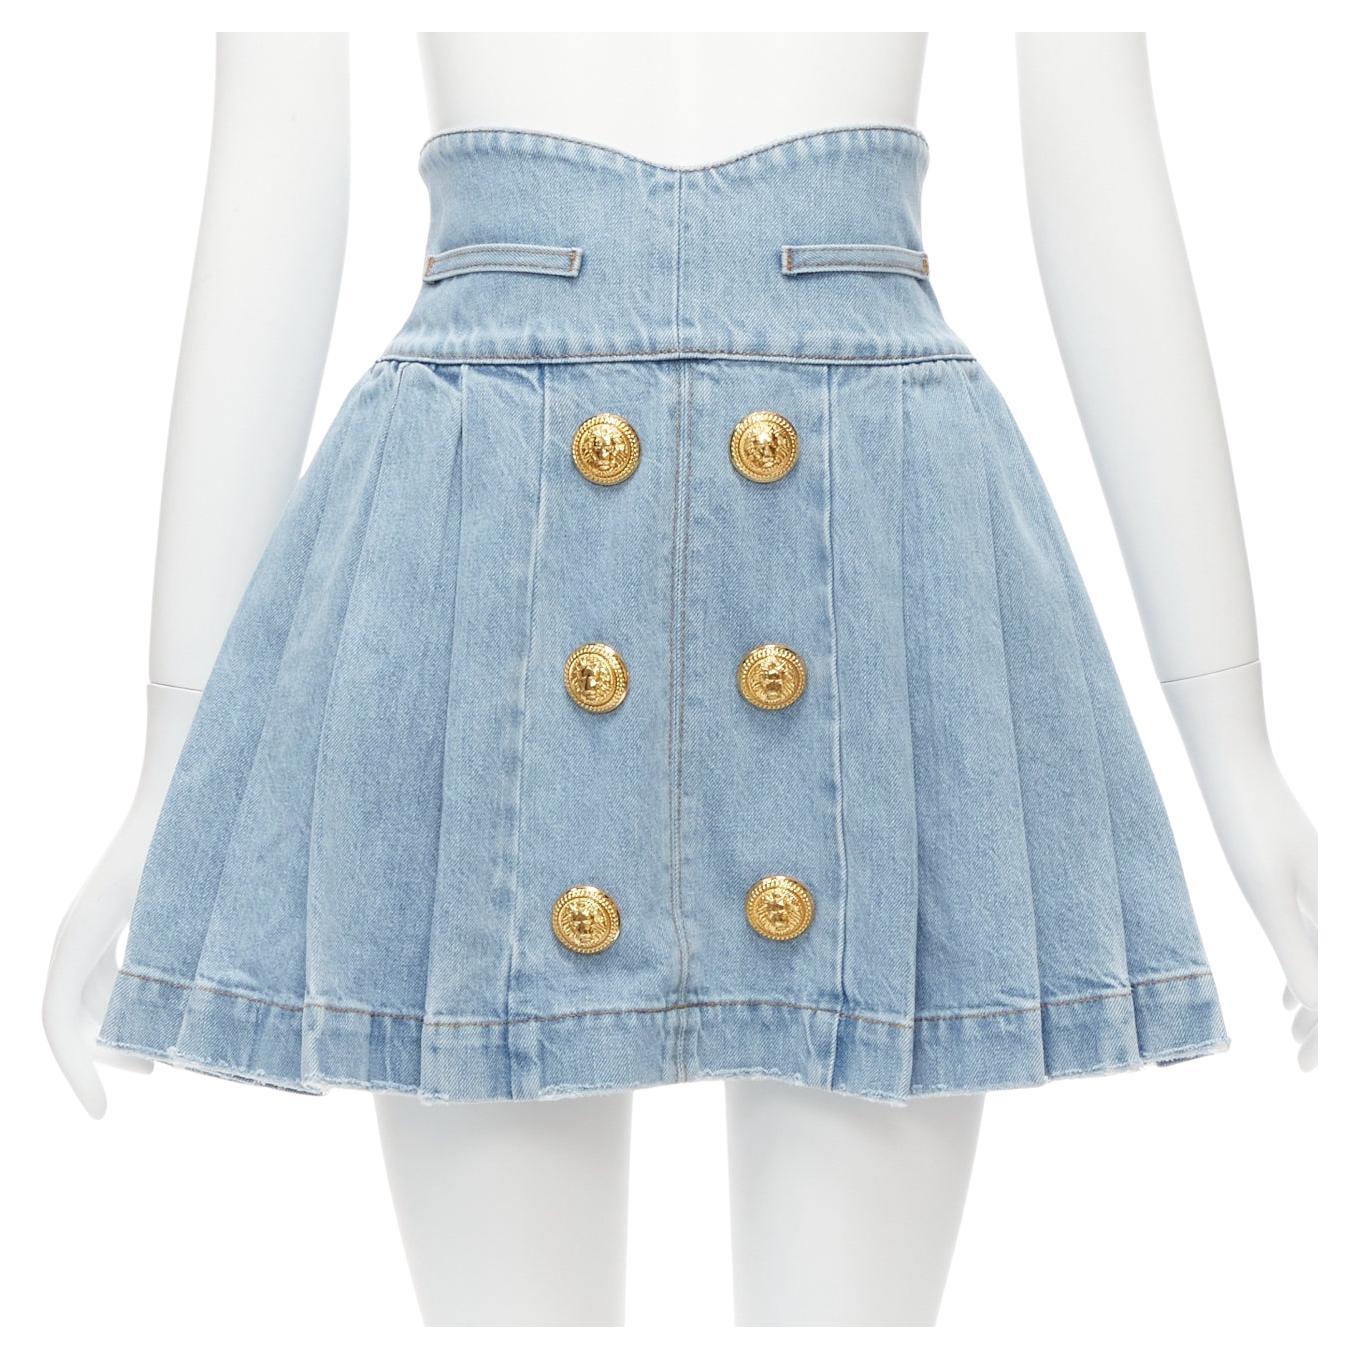 BALMAIN blue washed denim gold military buttons box pleat flared skirt FR34 XS